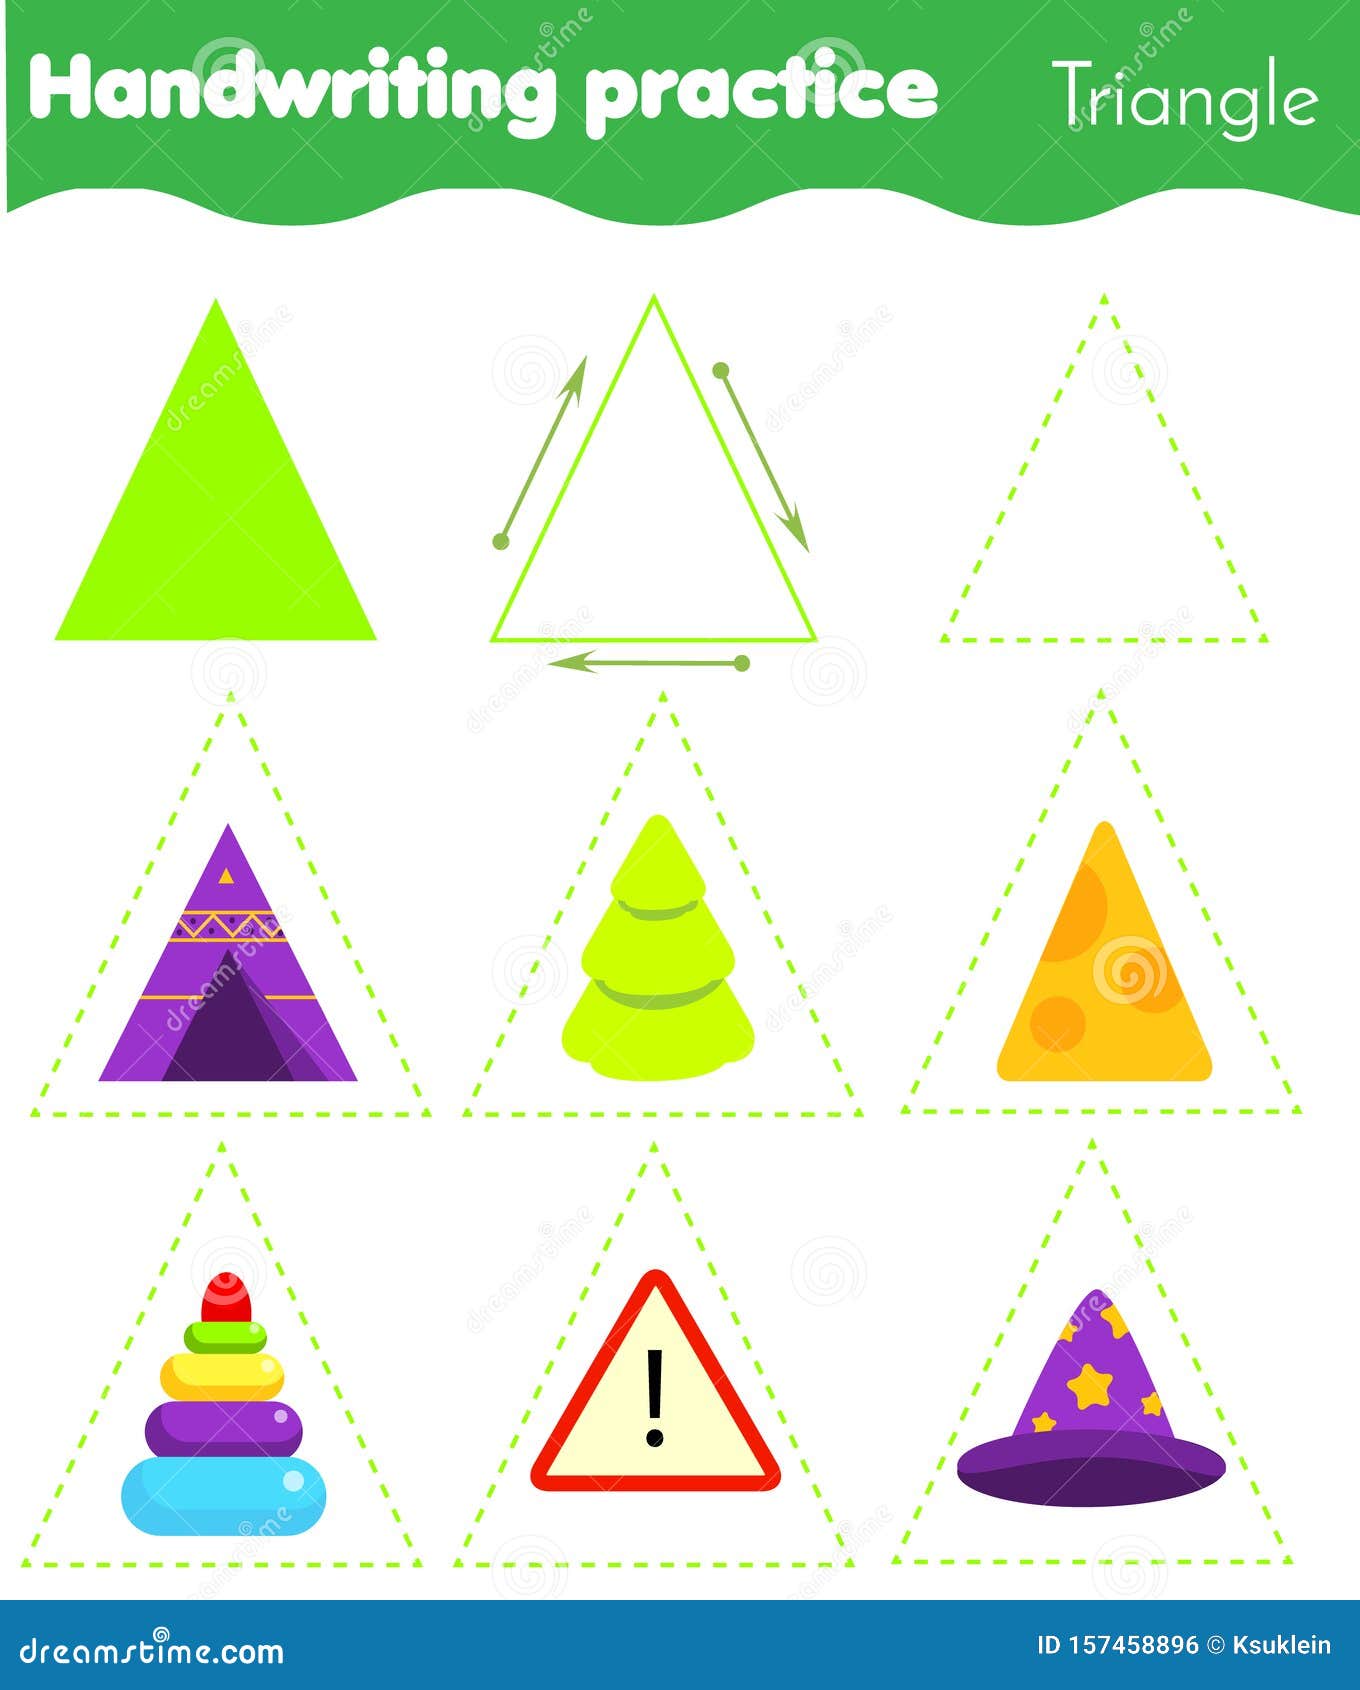 Triangle Form Objects. Handwriting Practice. Geometric Shapes for Kids ...